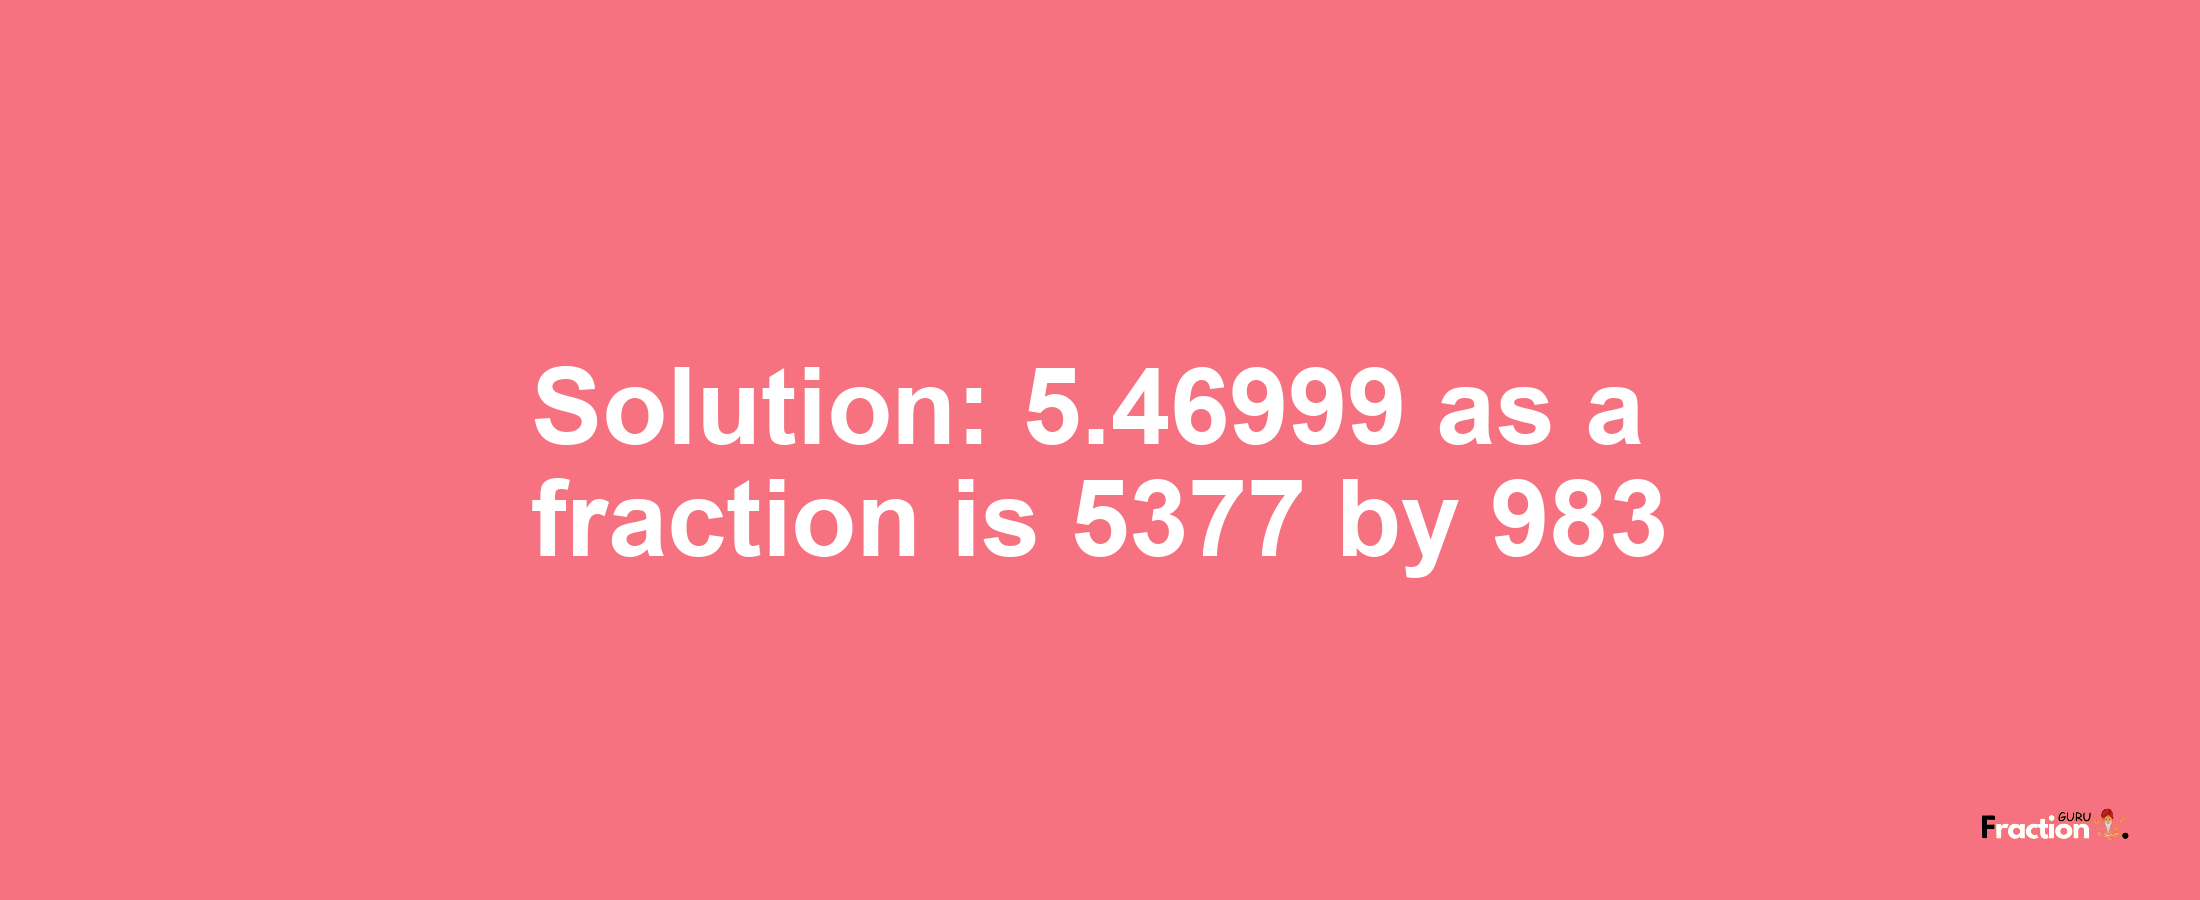 Solution:5.46999 as a fraction is 5377/983